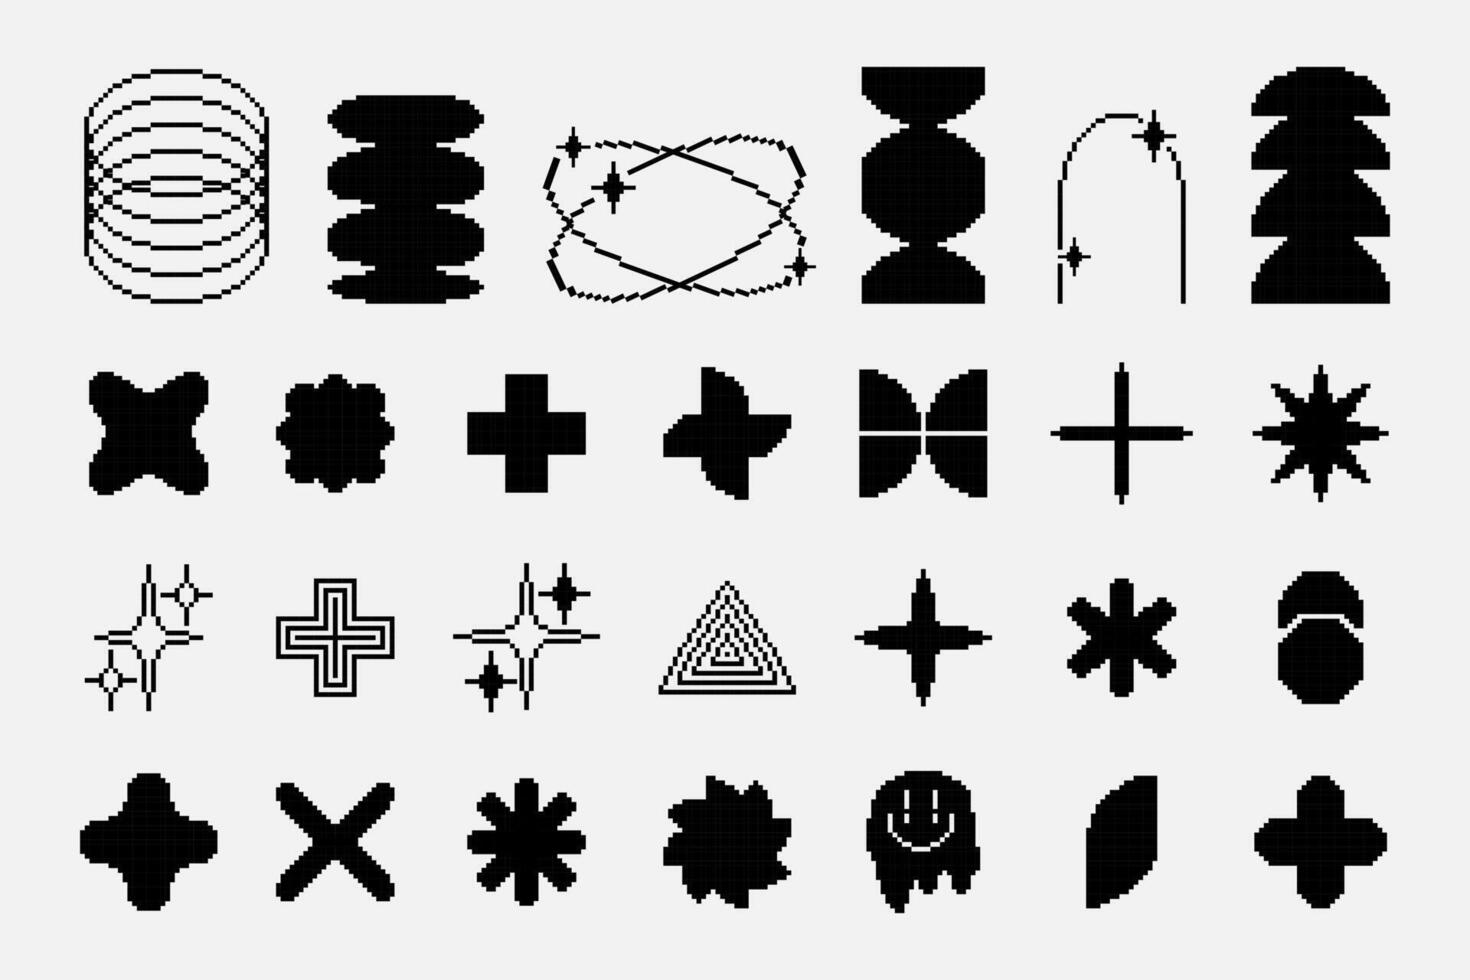 Set of abstract retro geometric shapes pixel art.8-bit, brutal contemporary figure star oval flower and other primitive elements. Black and white monochrome style . Vector illustration EPS 10